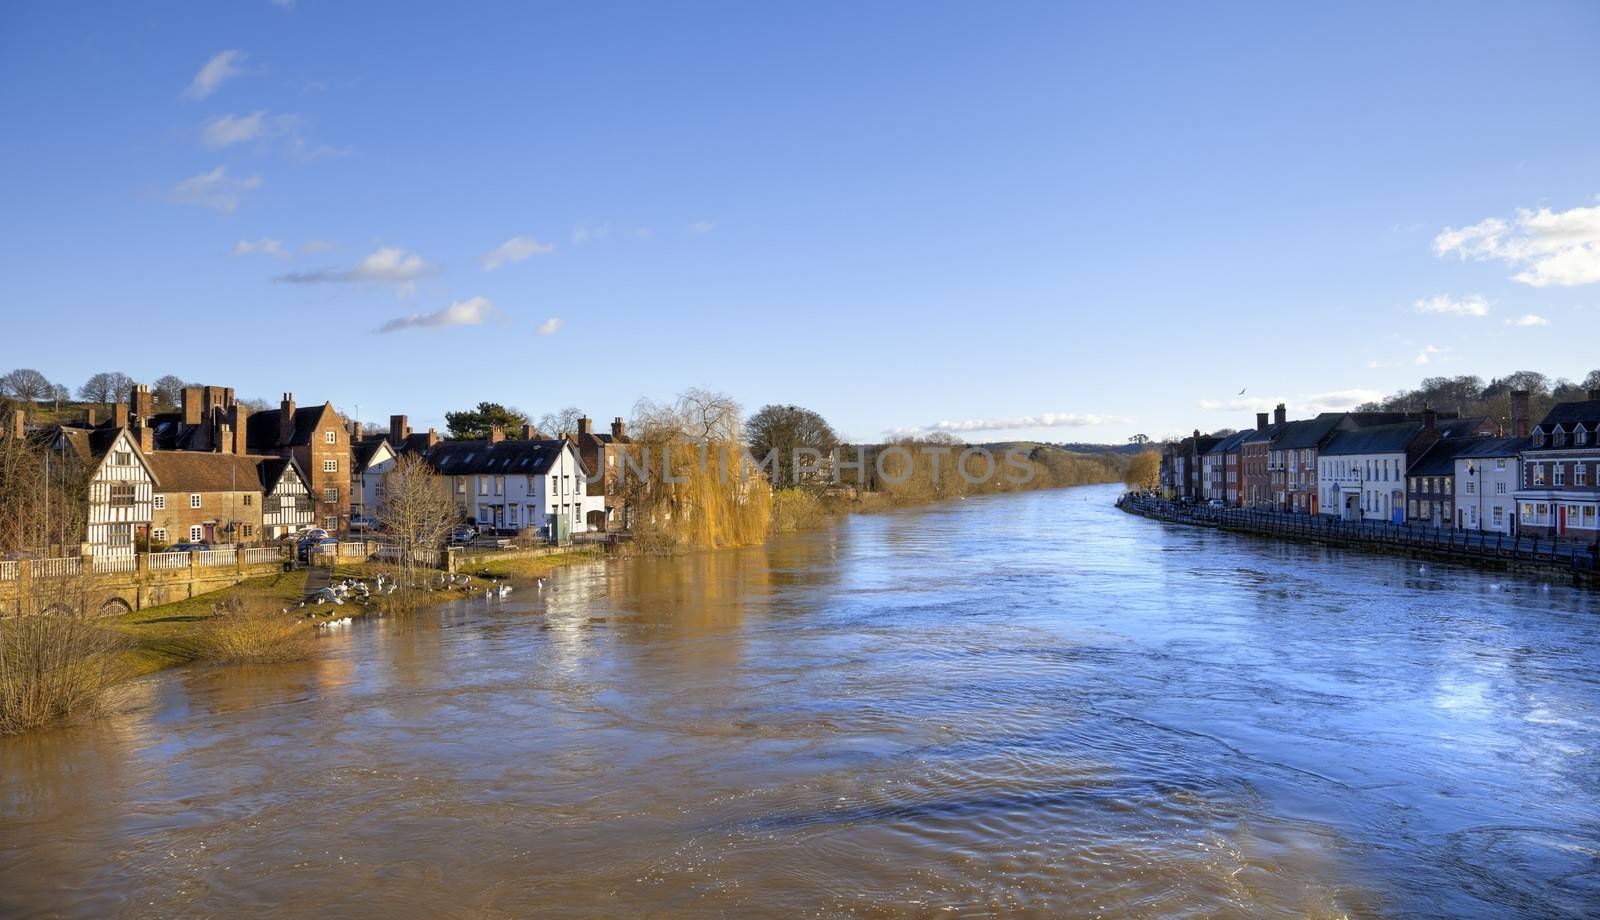 High water levels on the River Severn, Bewdley, Worcestershire, England.